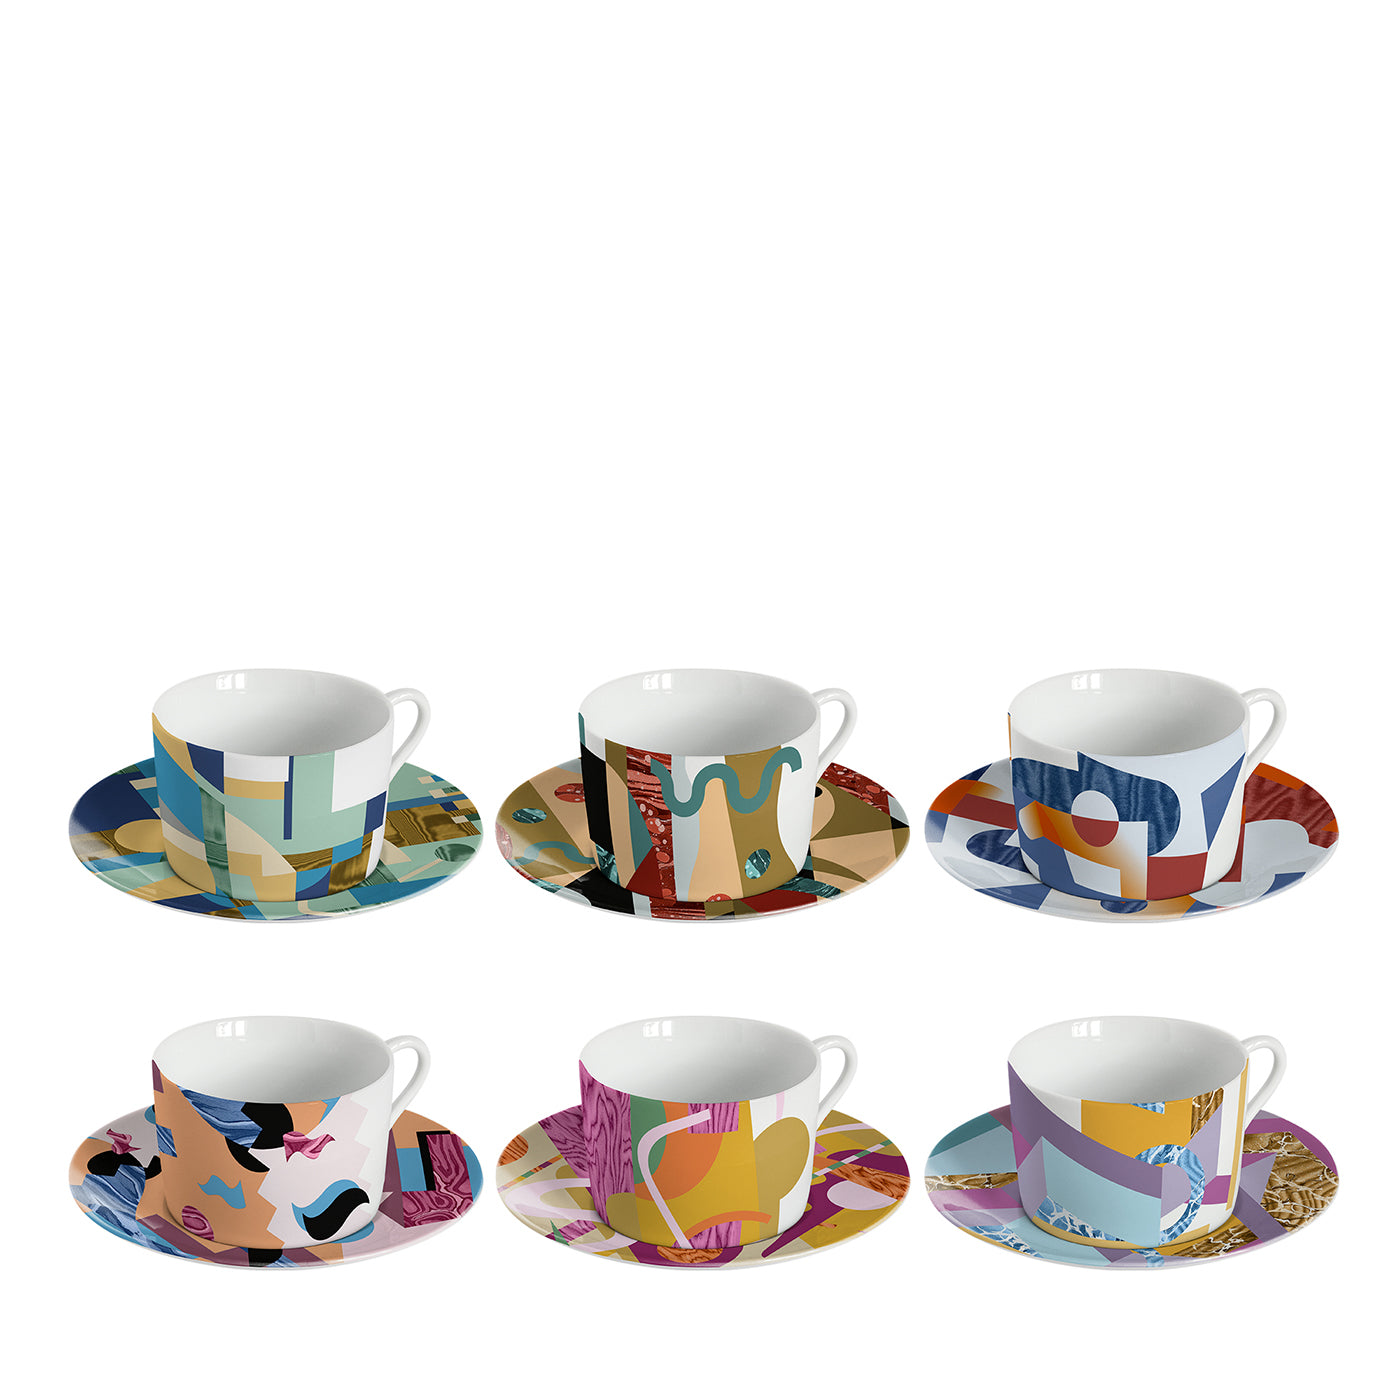 Alchimieset of 6 Porcelain Tea Cups with Abstract Decor - Main view